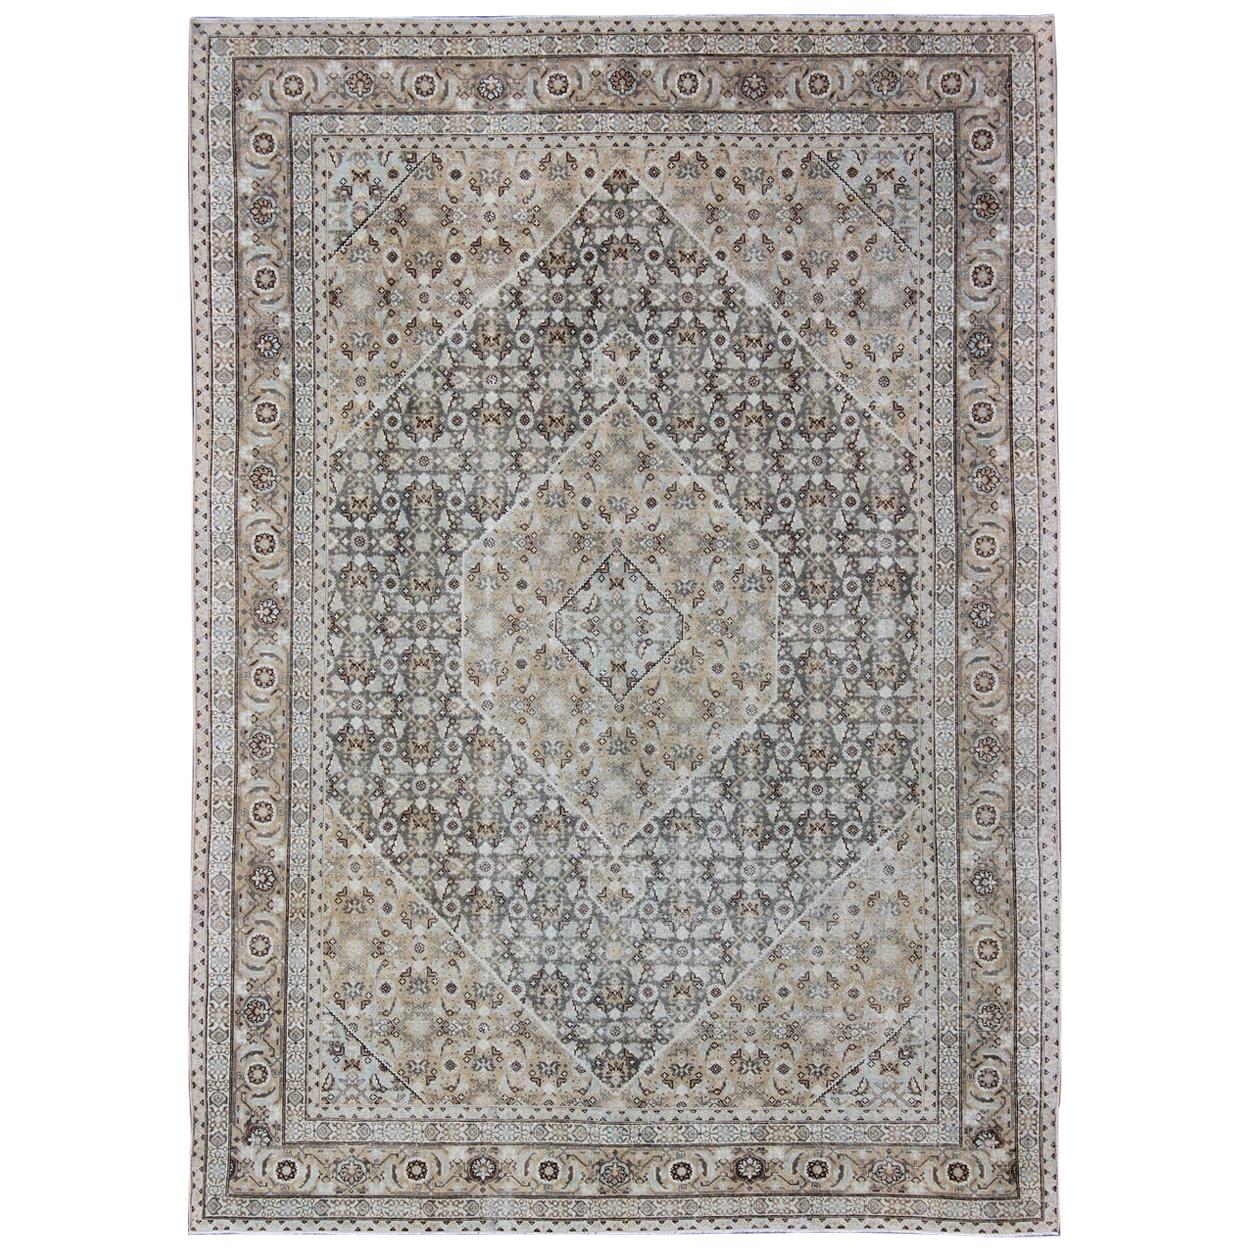 Antique Persian Tabriz Rug with a Geometric Diamond Design For Sale at ...